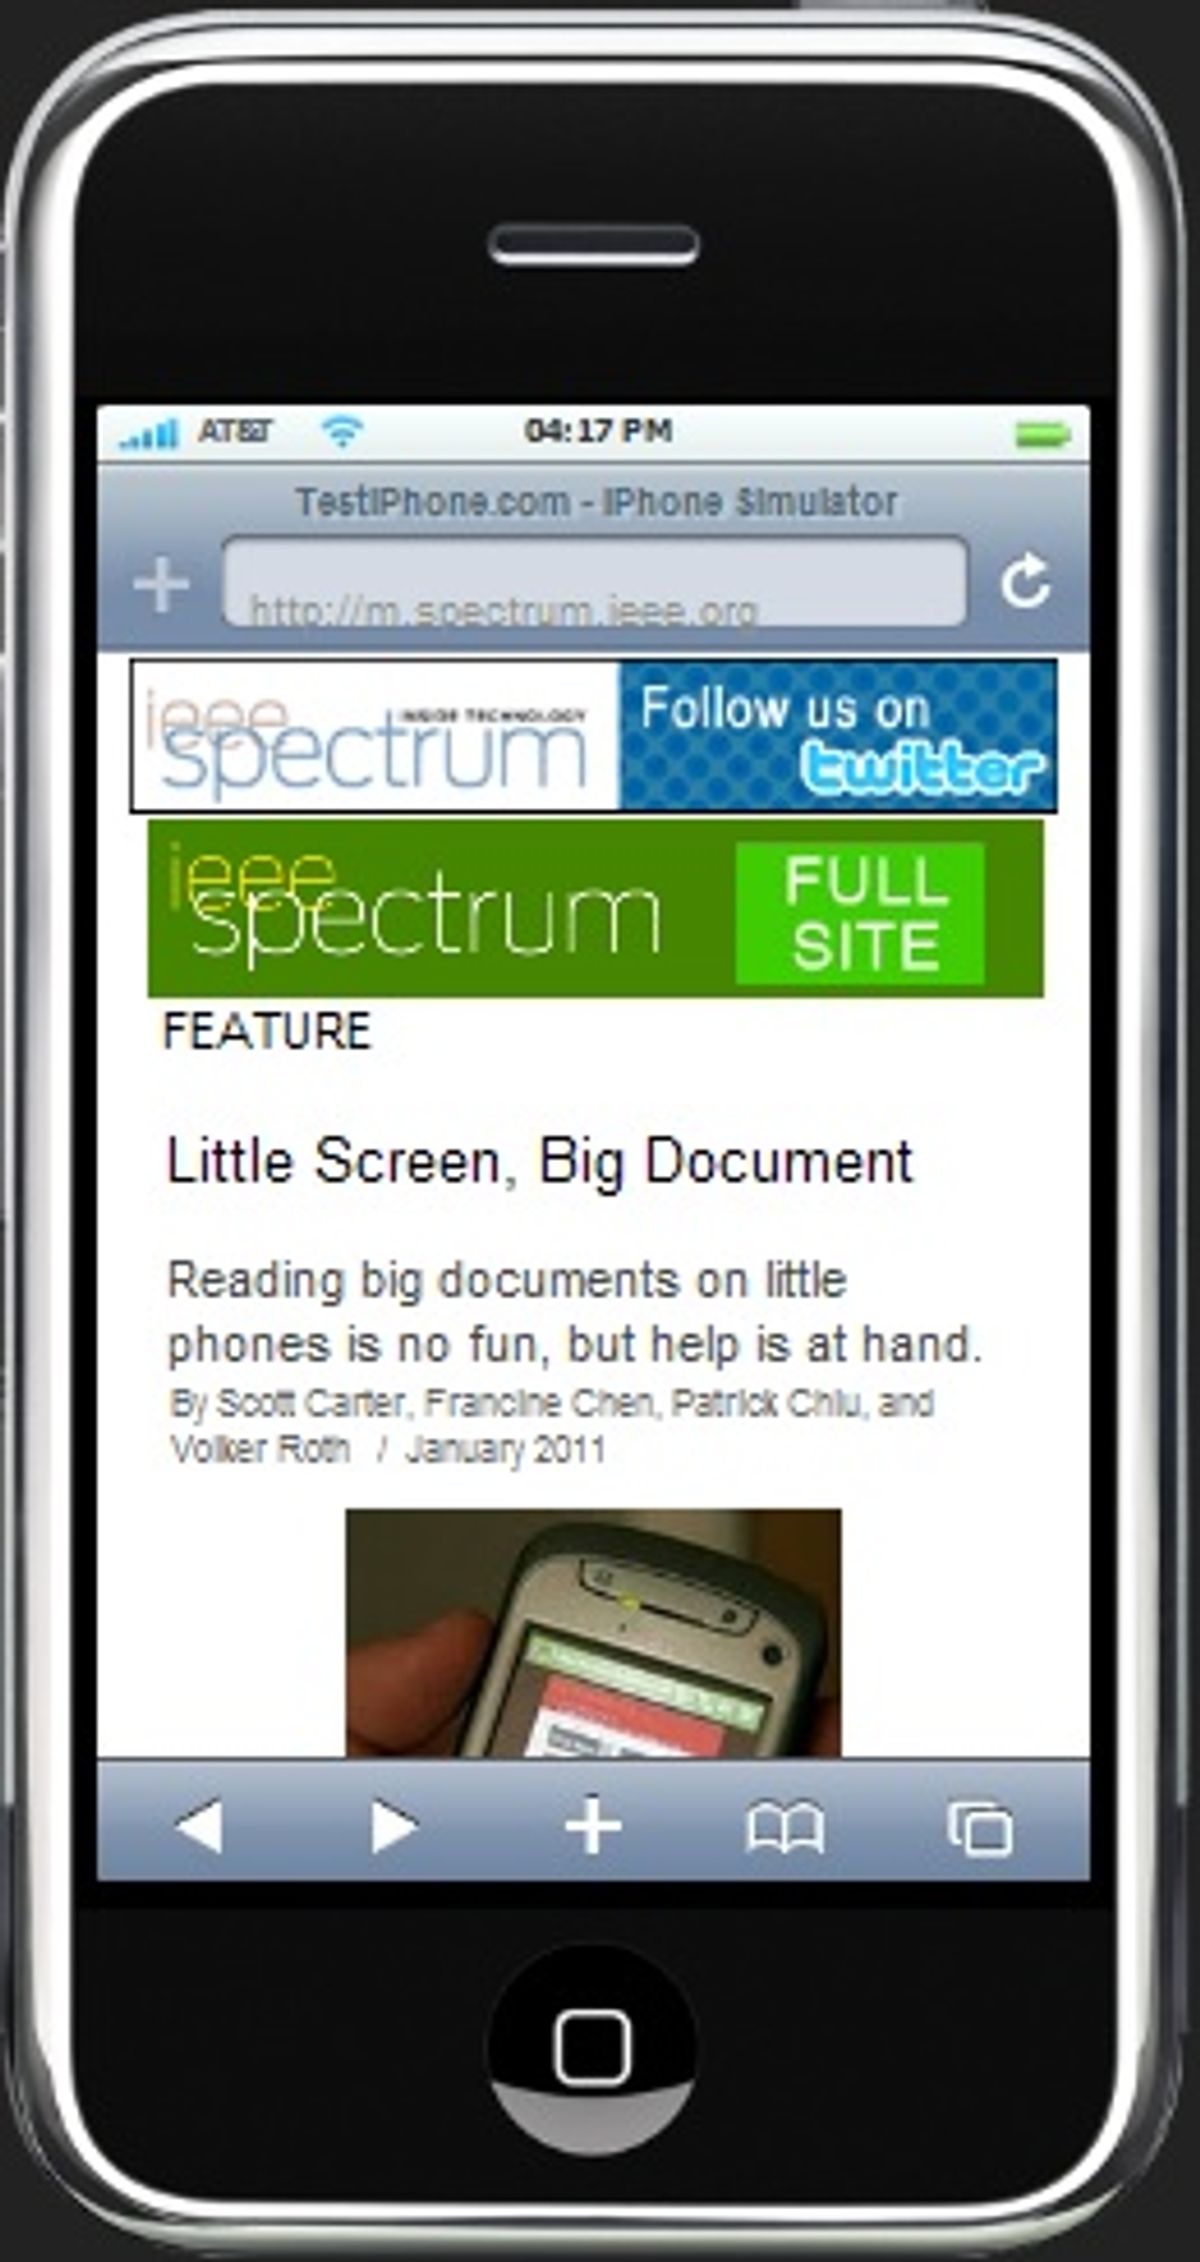 Introducing the IEEE Spectrum Mobile Web Site